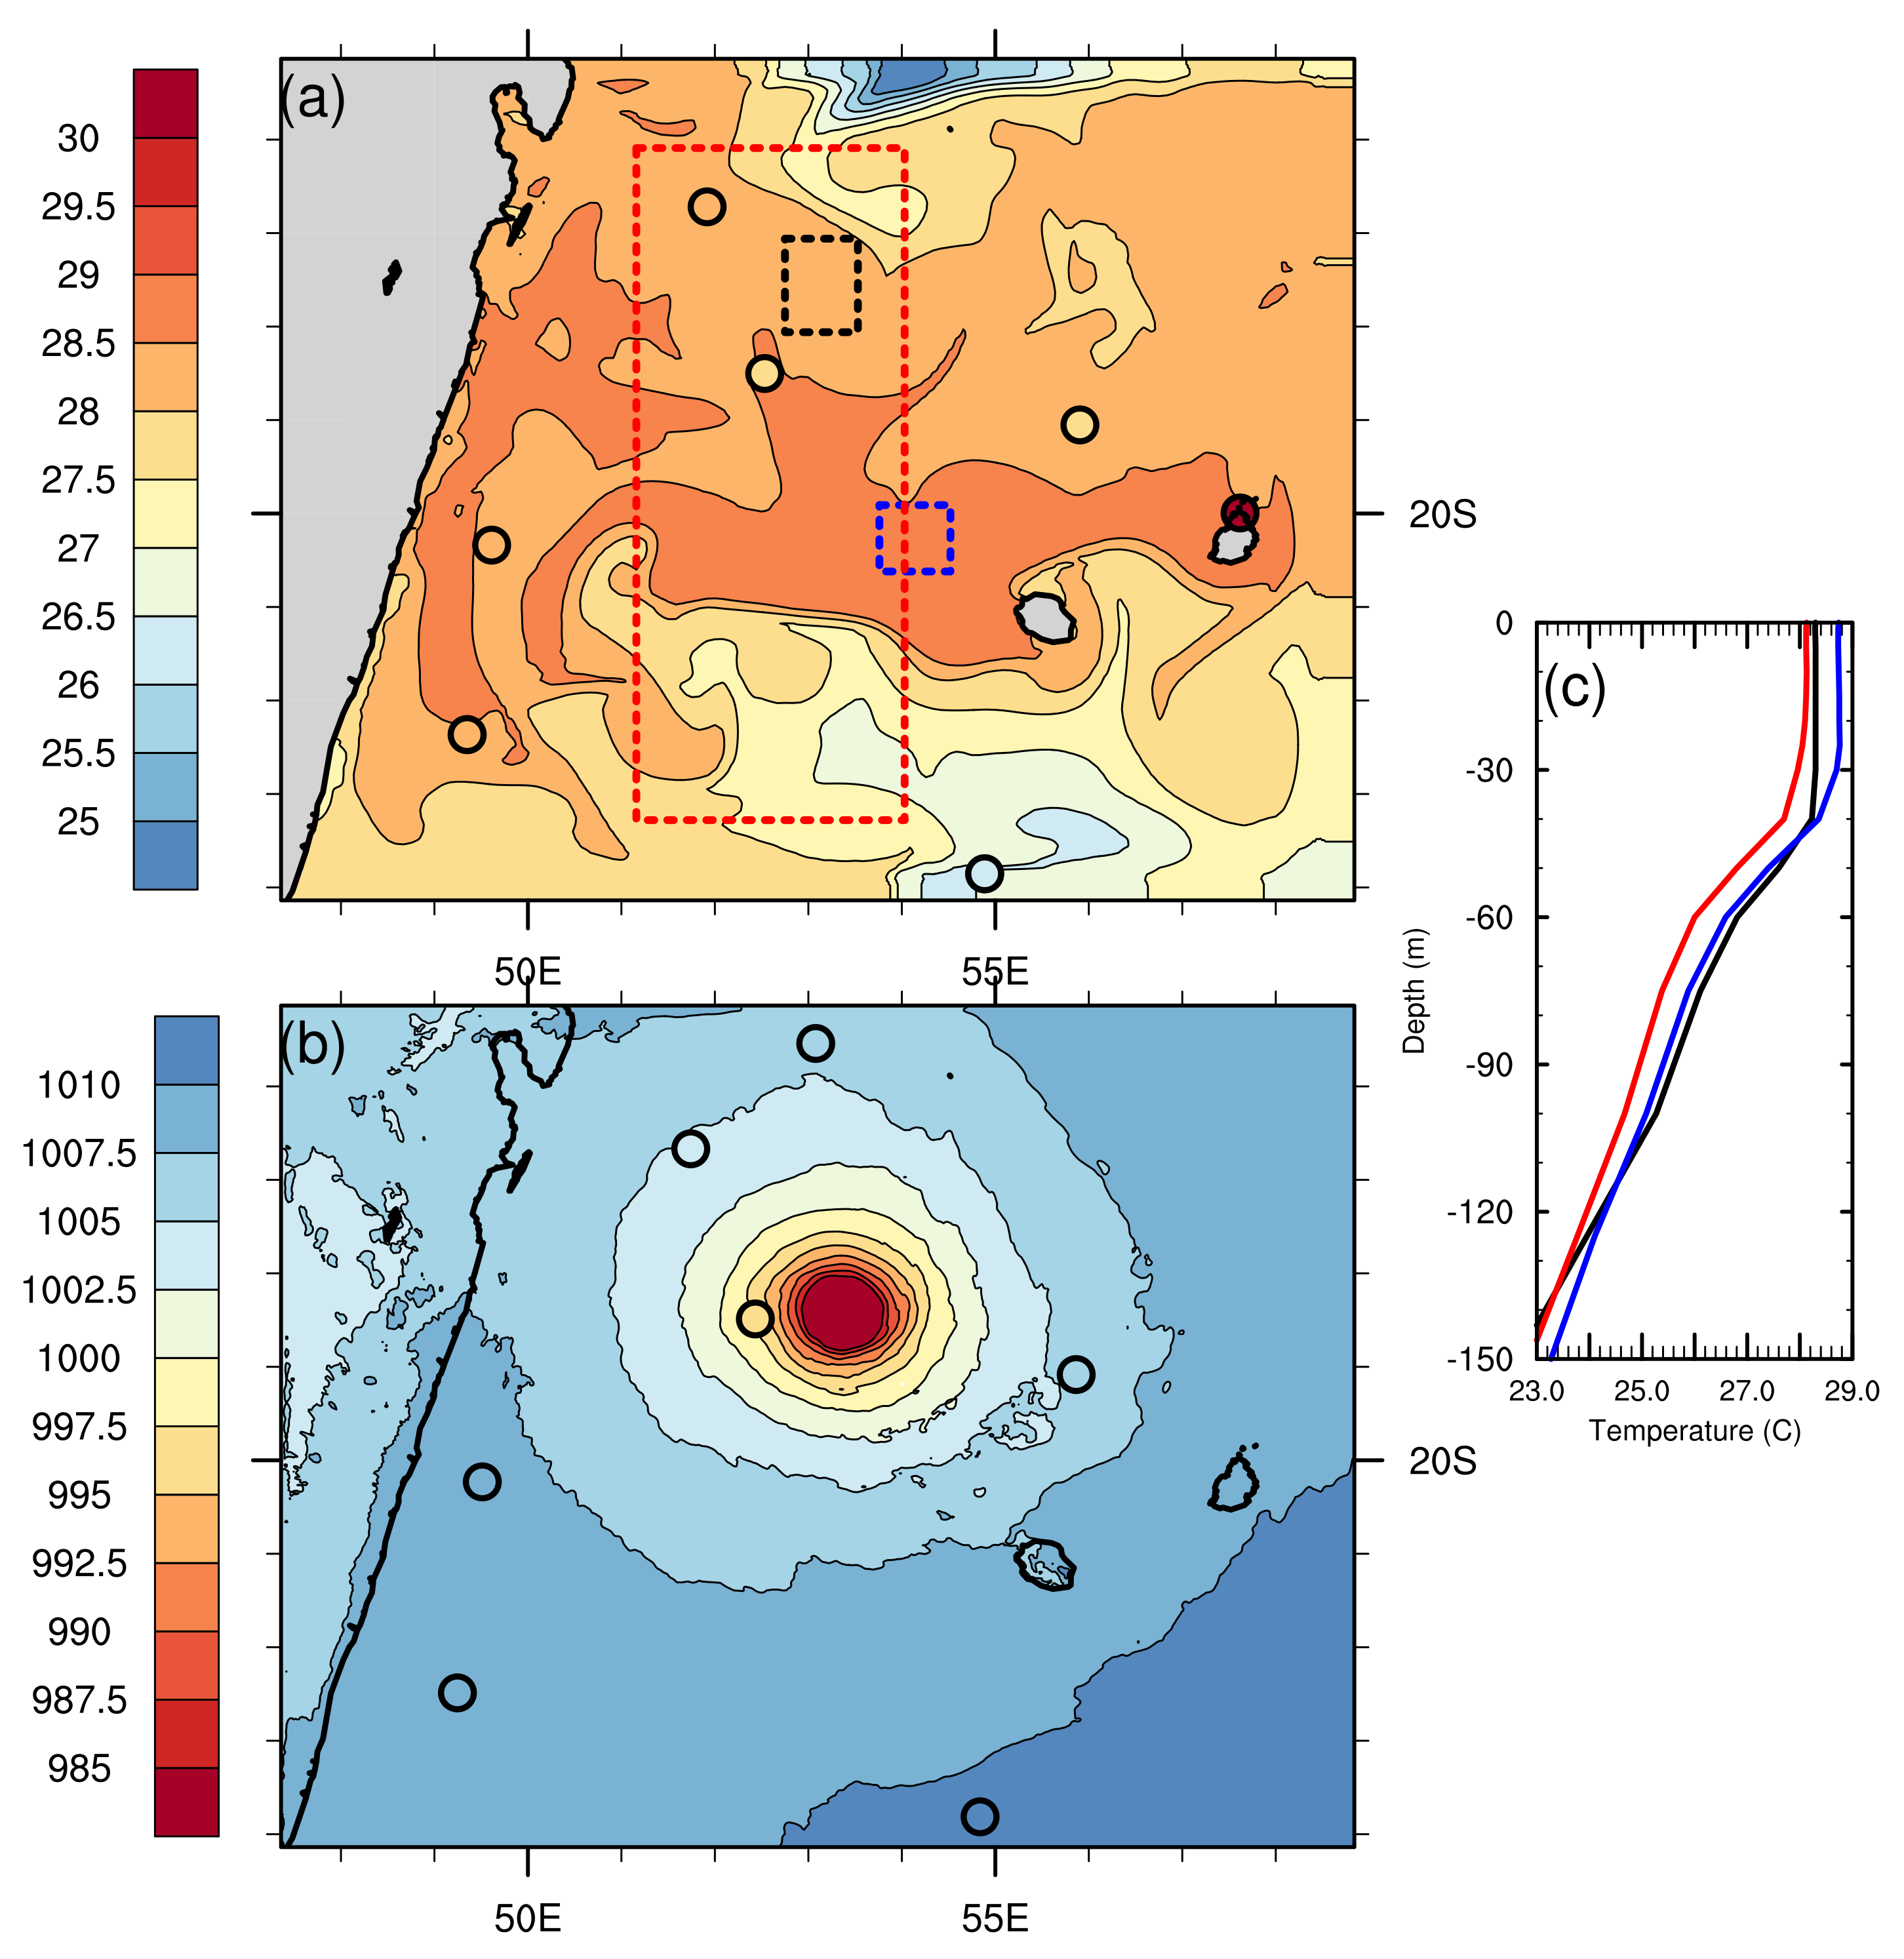 Atmosphere Free Full Text The Effect Of Atmosphere Ocean Coupling On The Structure And Intensity Of Tropical Cyclone Bejisa In The Southwest Indian Ocean Html